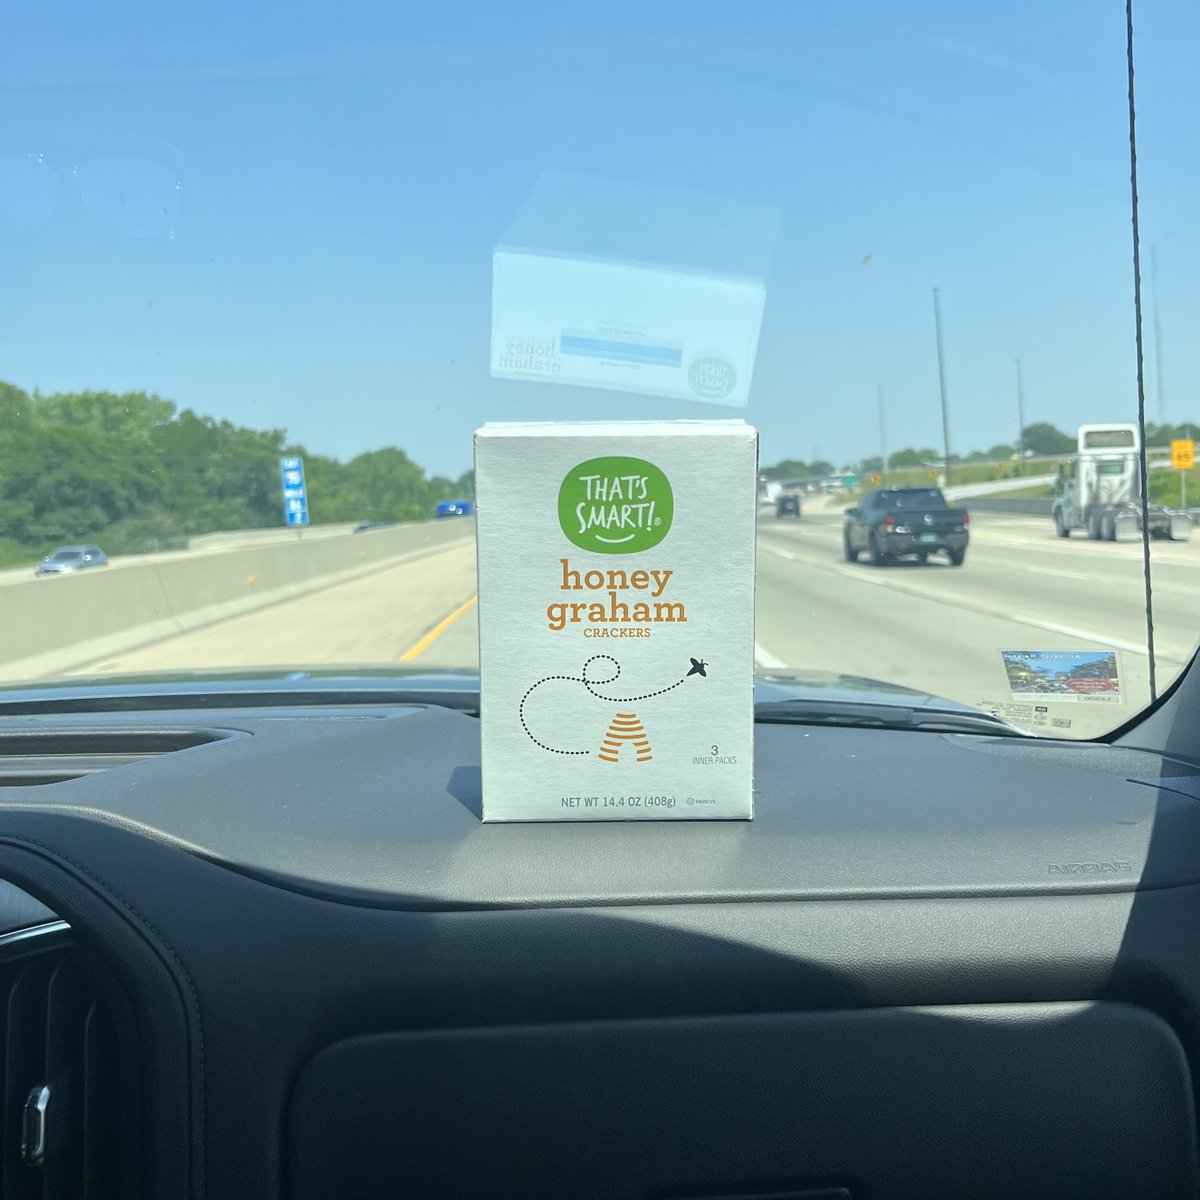 Taking a road trip this summer? Don't forget the best part of any road trip- the snacks! Our honey grahams are sure to be one that the whole family will enjoy.